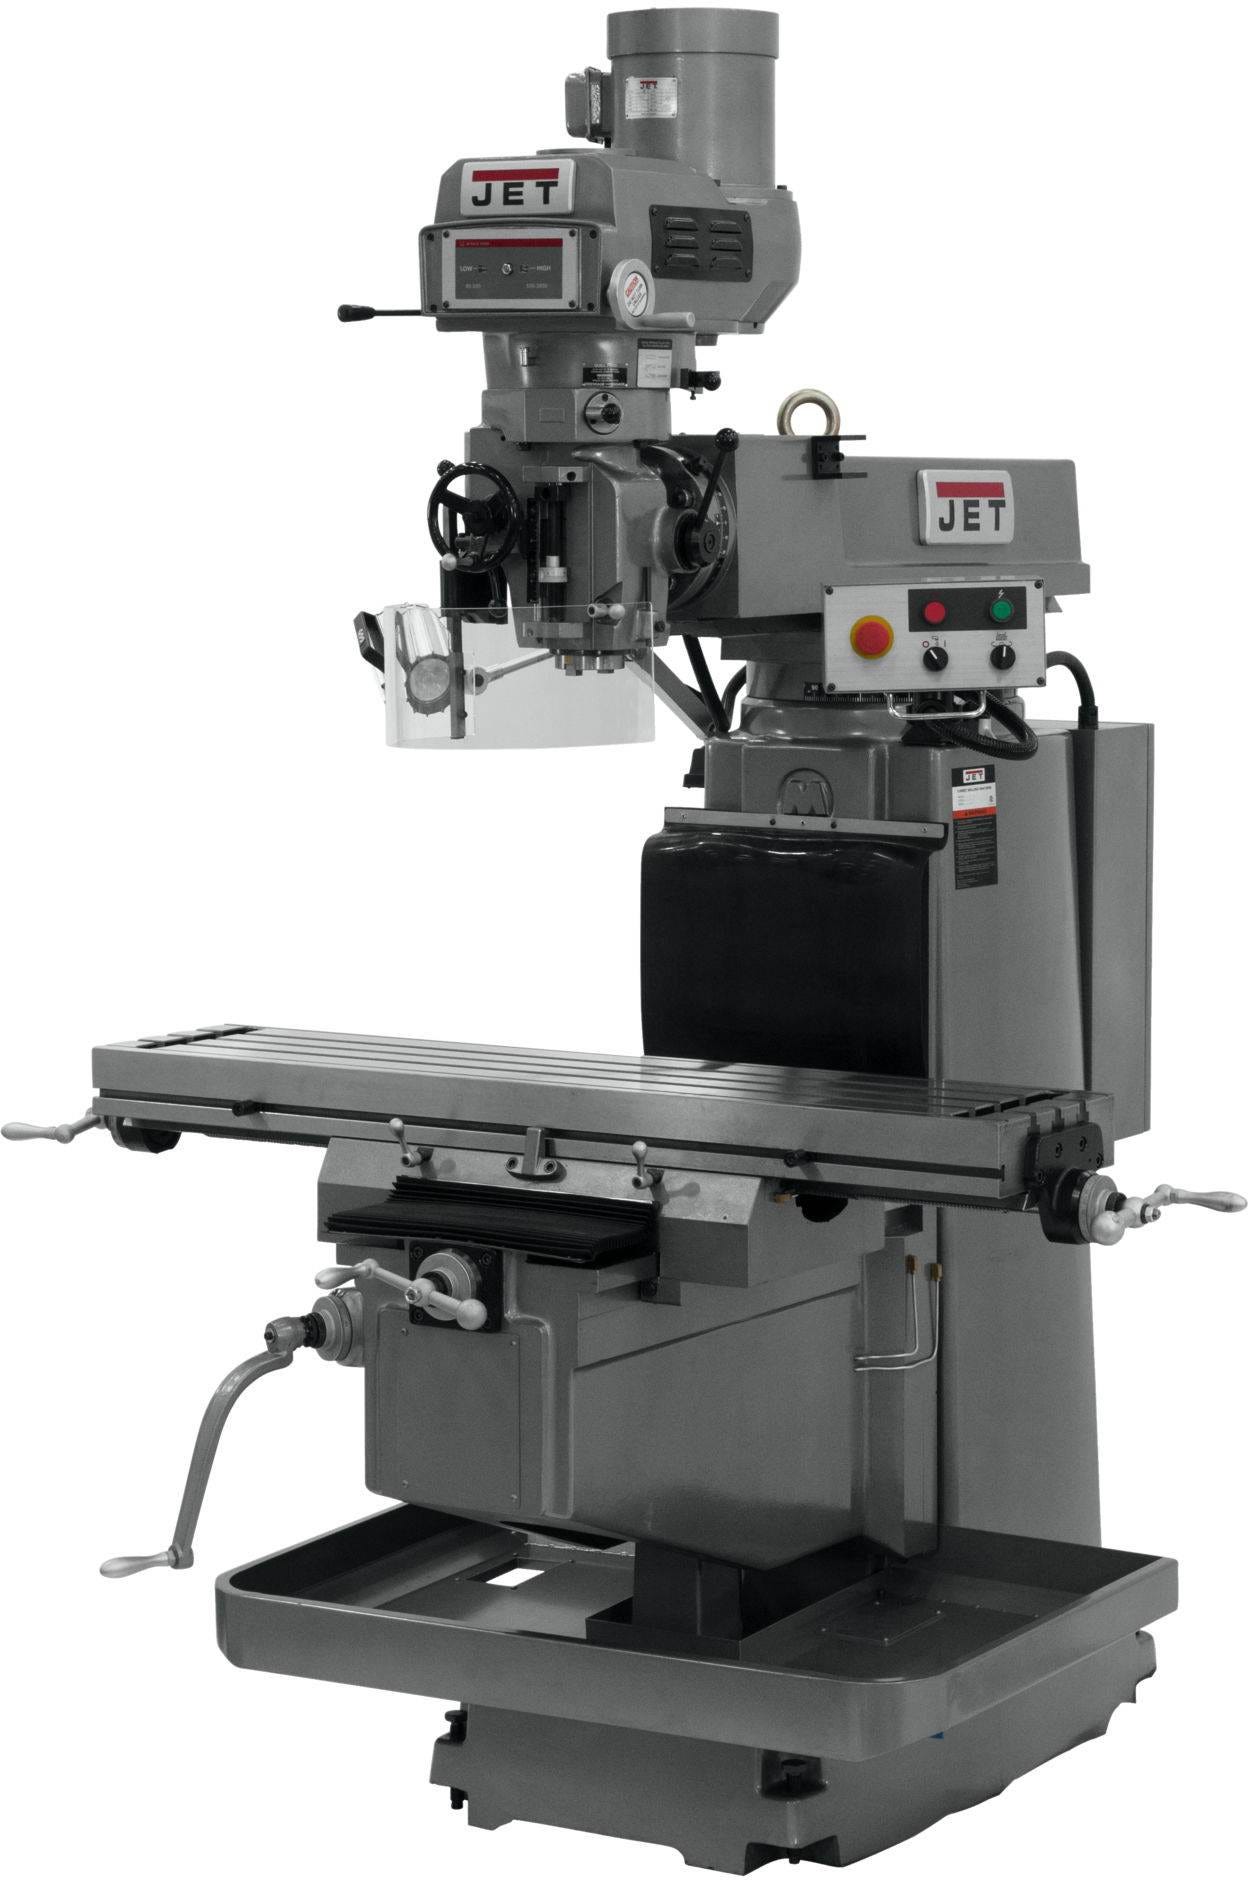 Jet Tools 691942 JTM 1254VS with 3 Axis ACU RITE G 2 MILLPOWER CNC with Air Power Drawbar